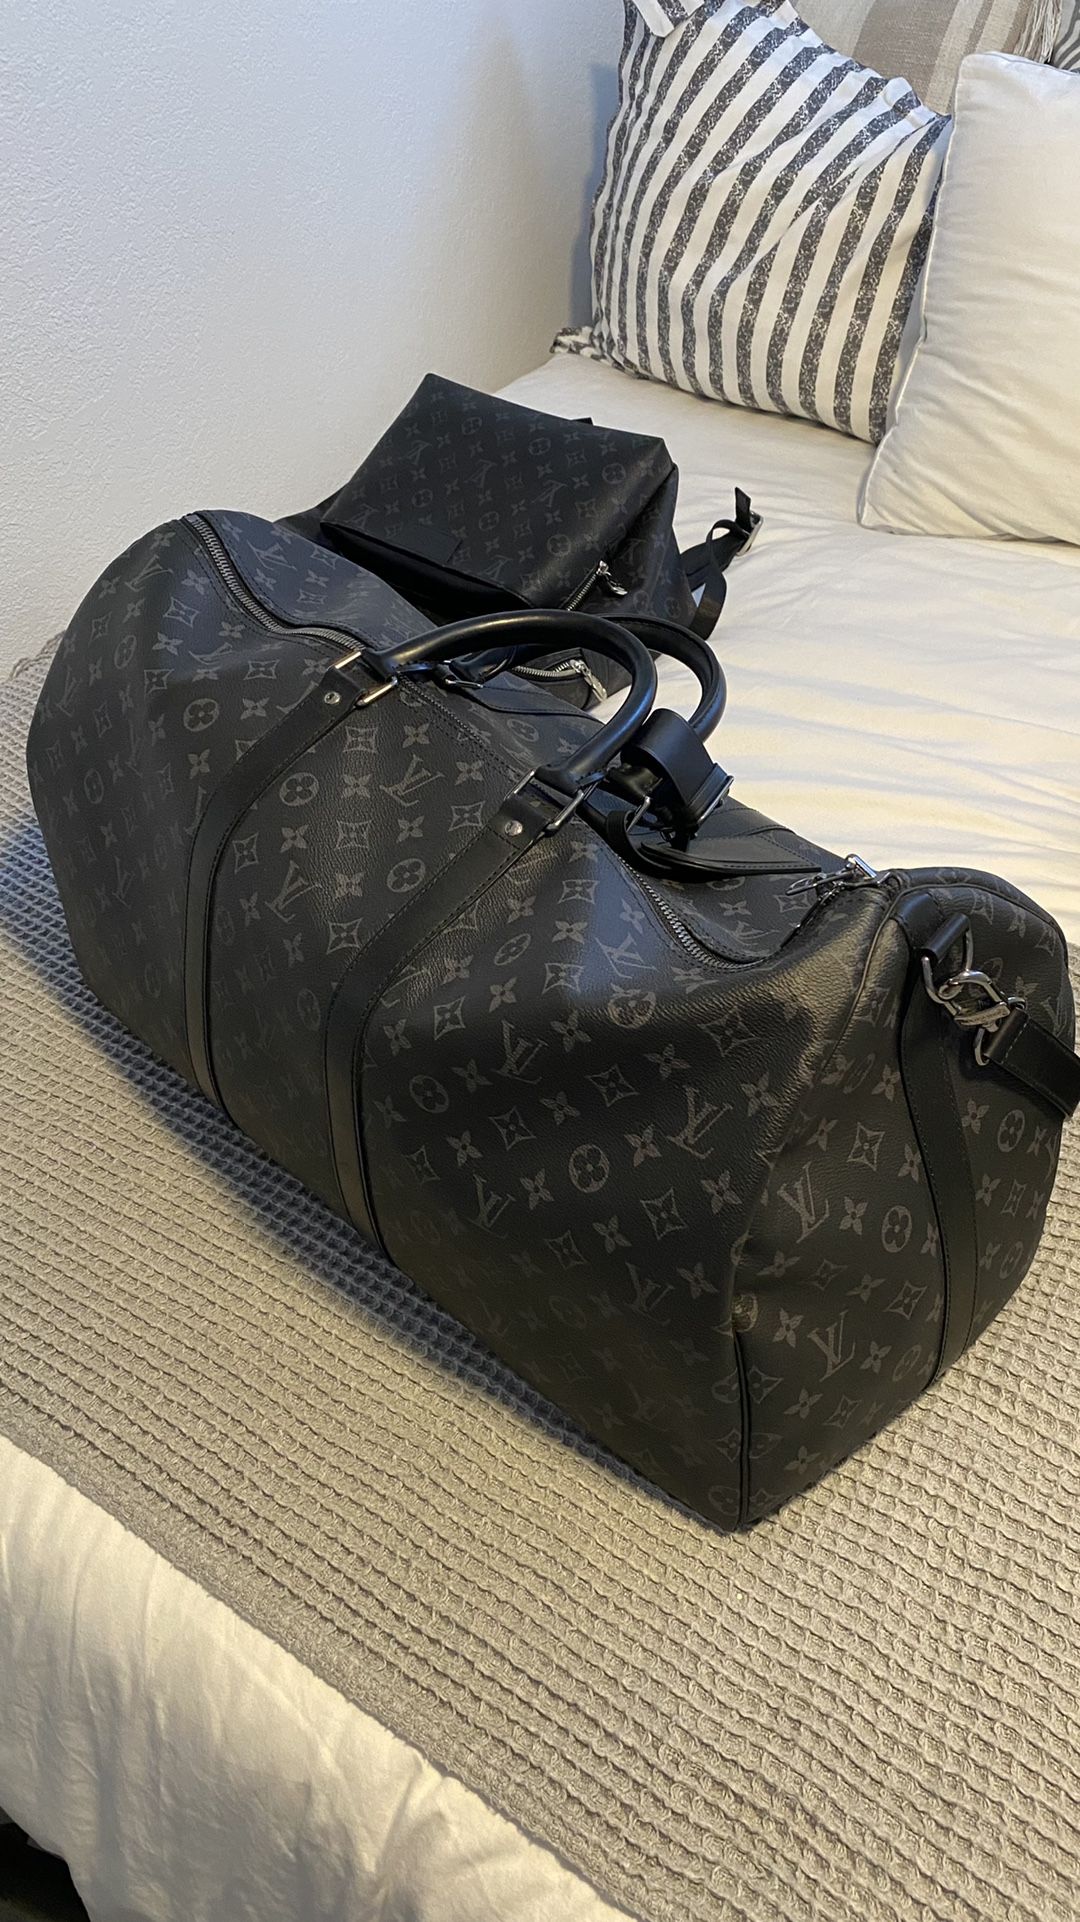 This is the receipt for my Louis Vuitton keepall - Depop